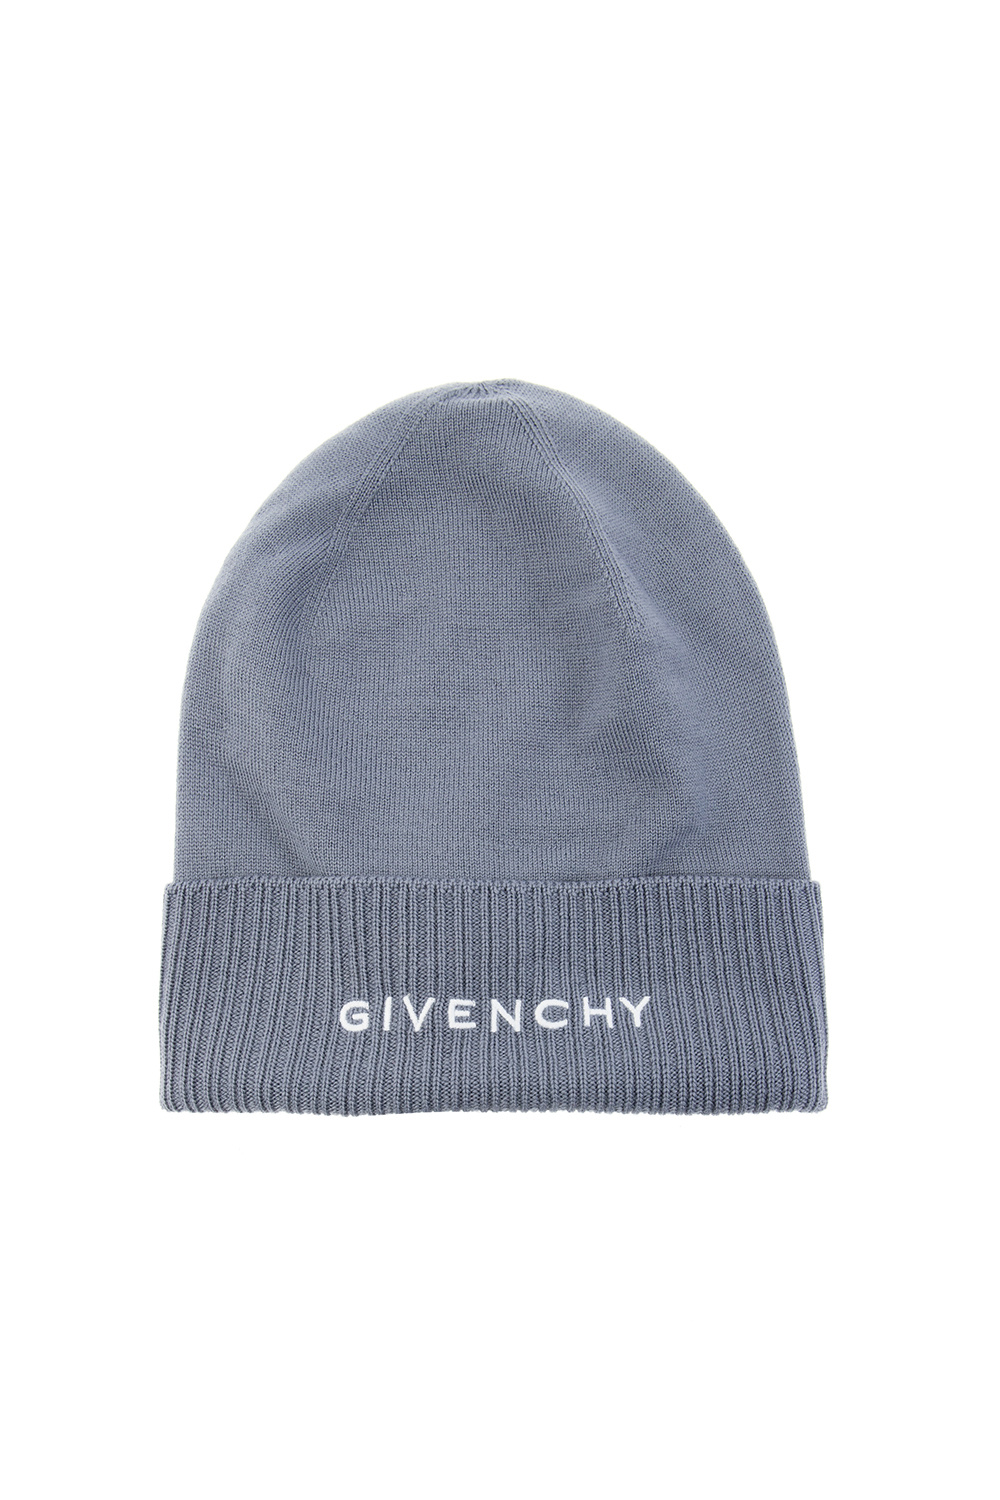 givenchy RING Wool beanie